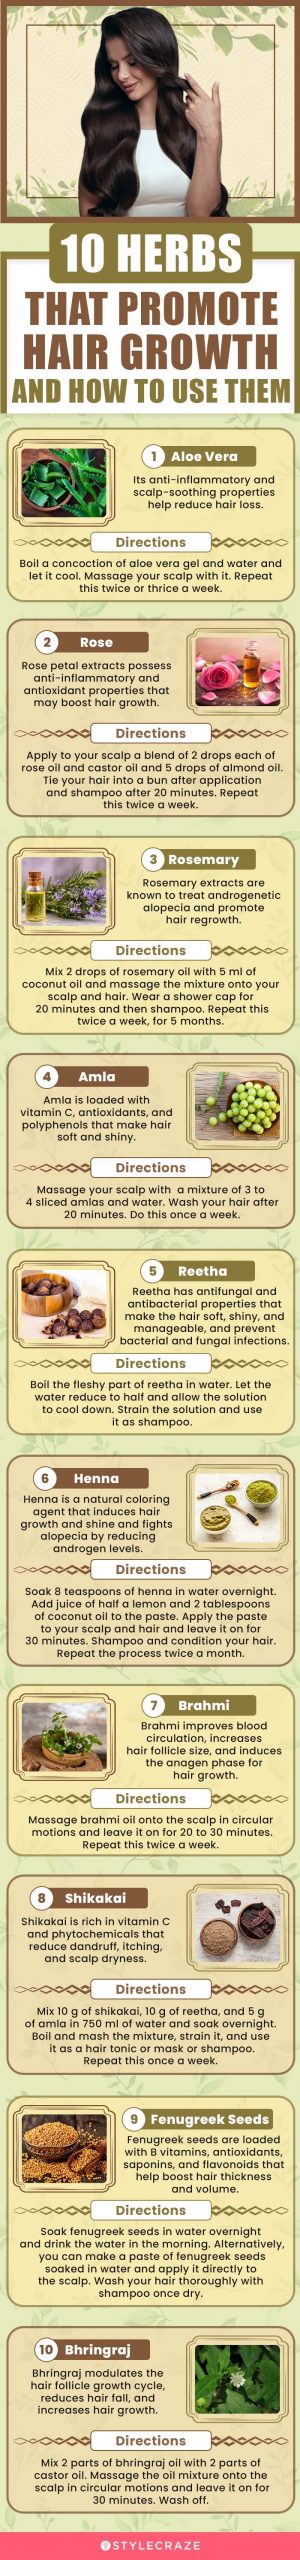 10 herbs that promote hair growth and how to use them (infographic)